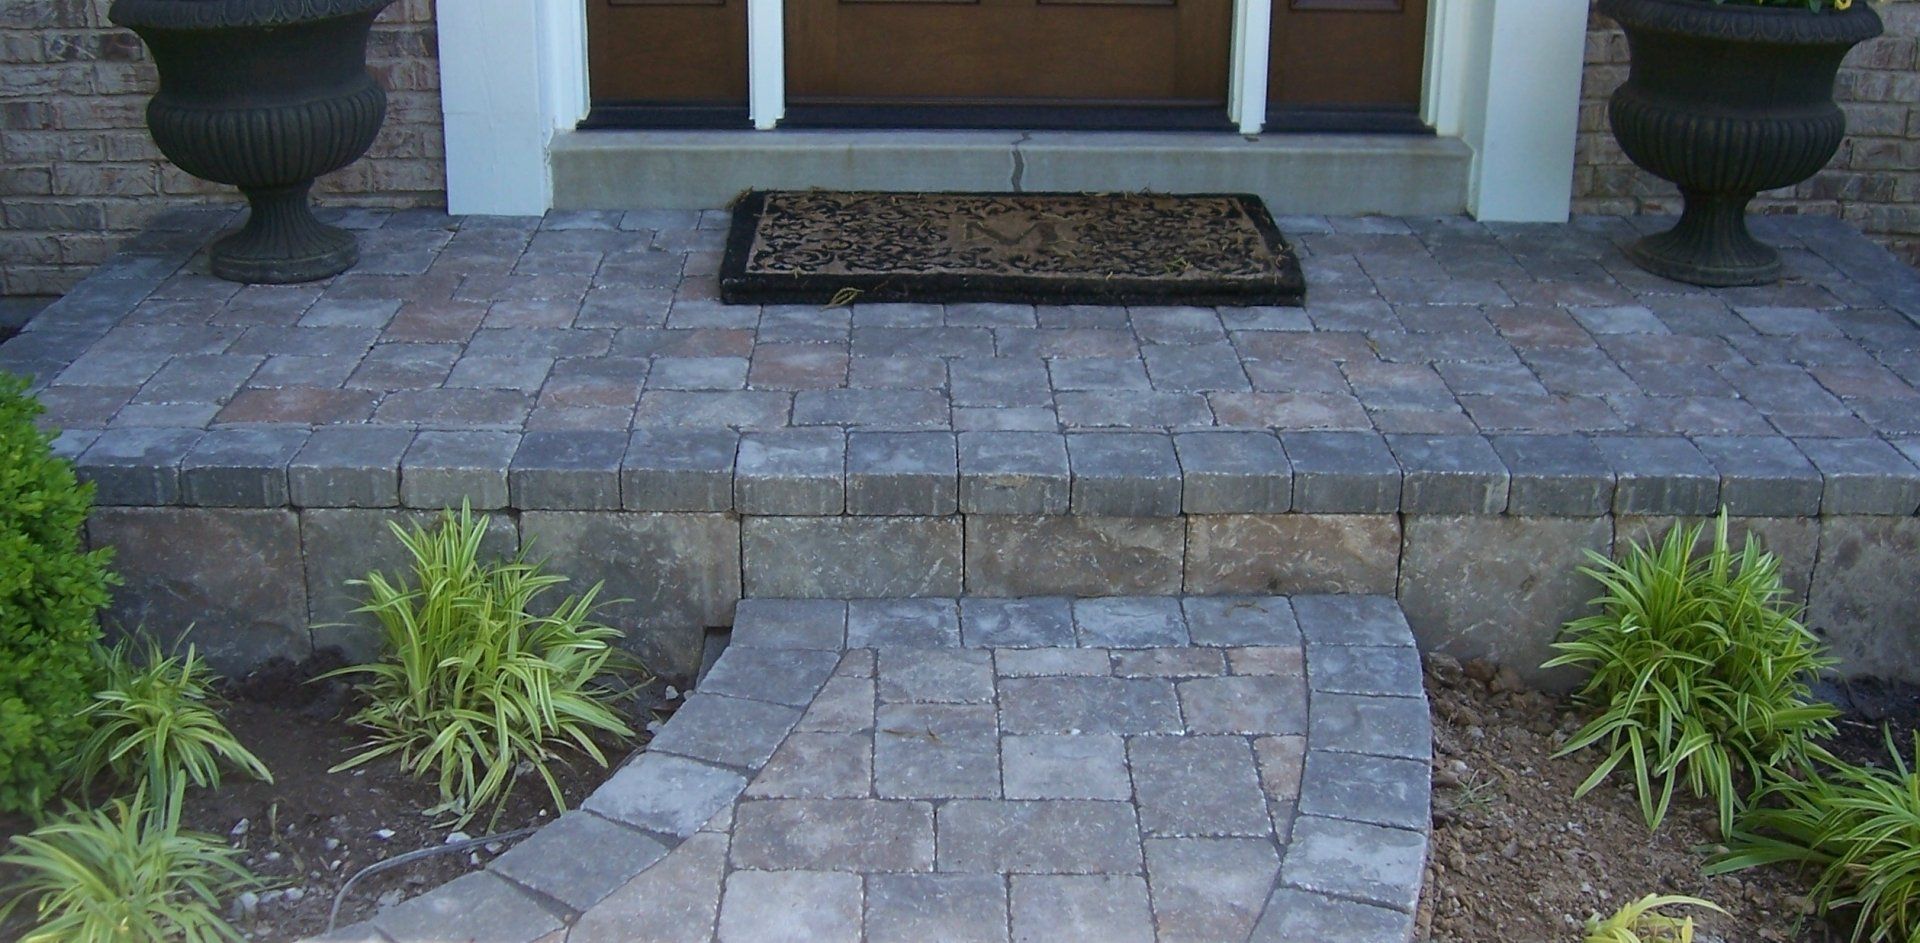 Paver porch & pathway with landscaping